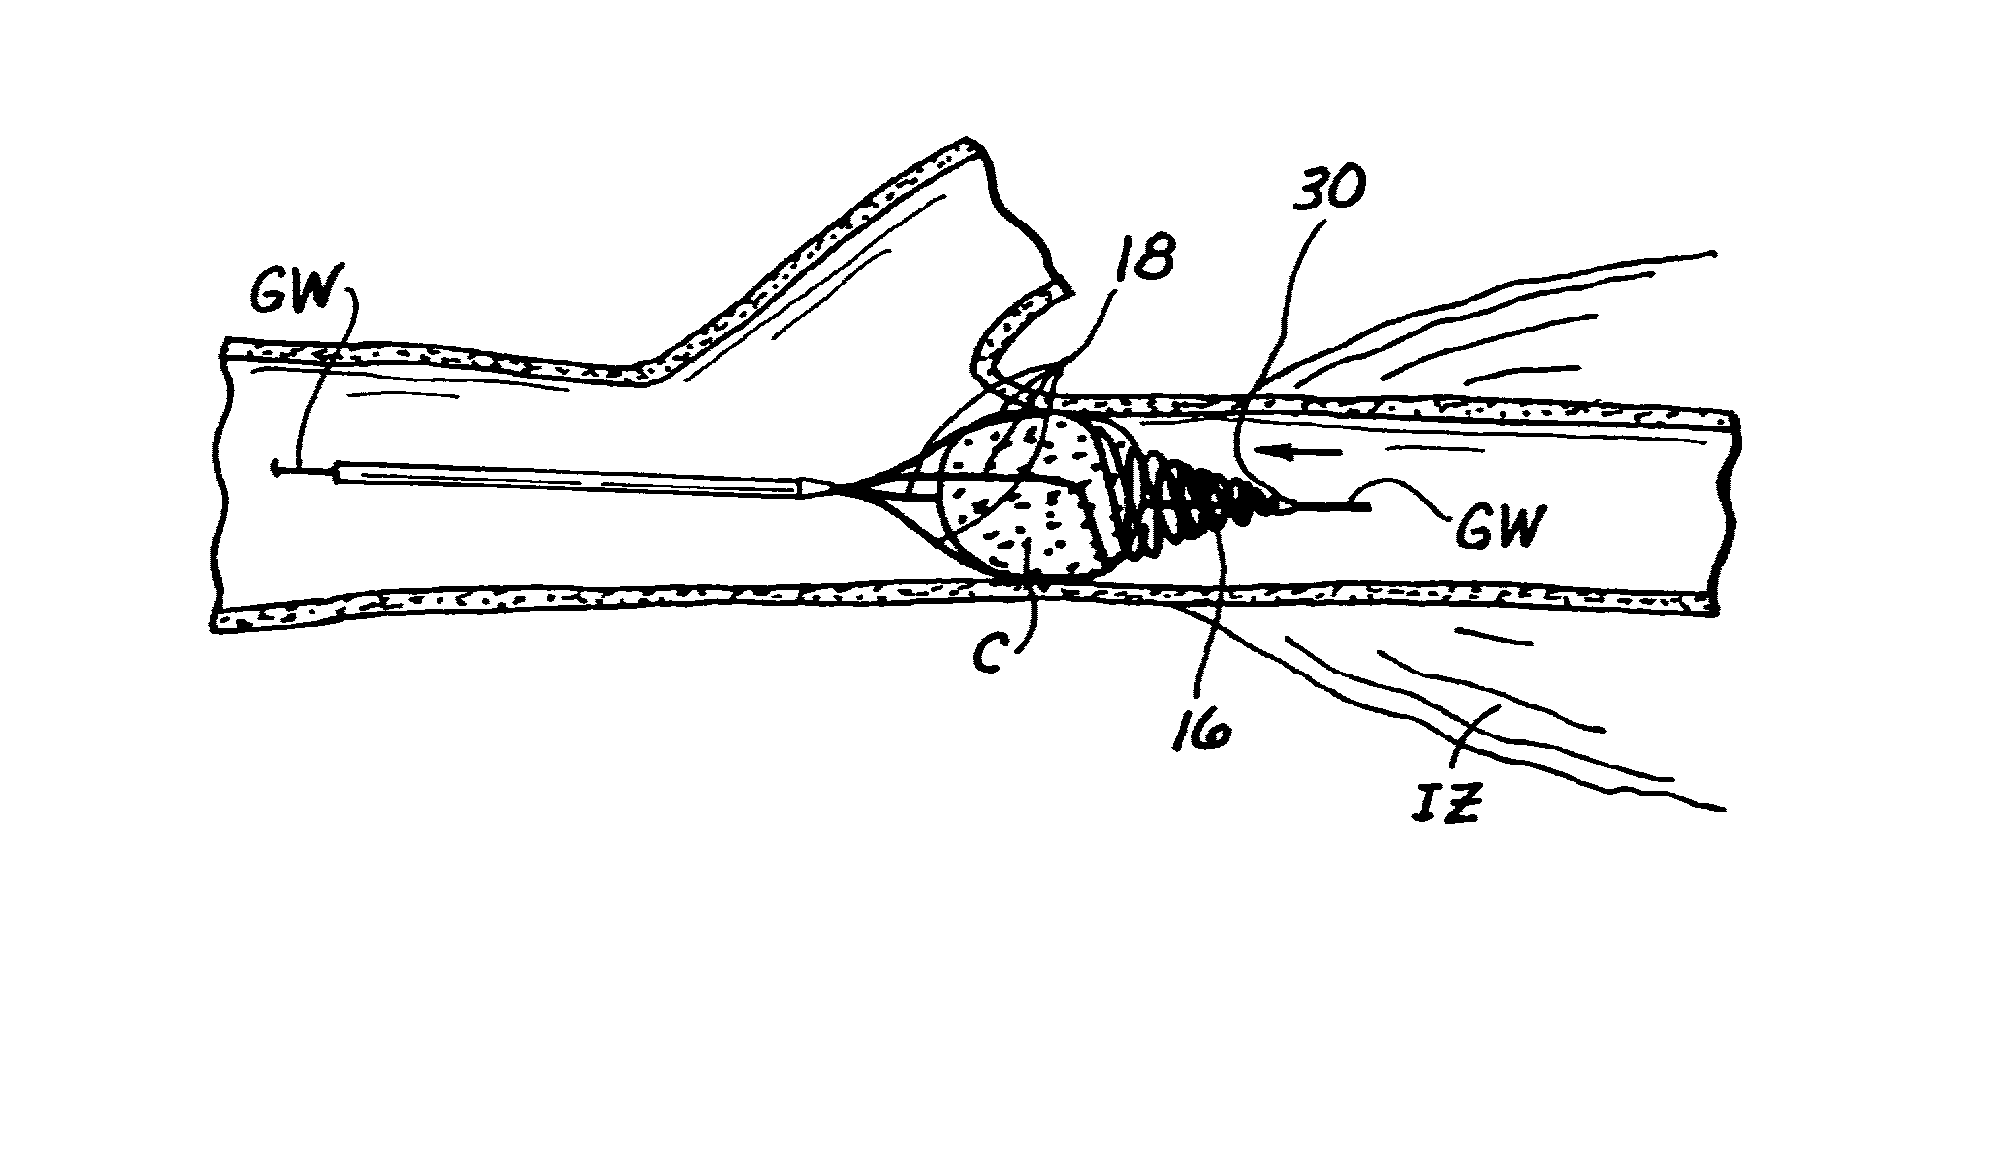 Embolectomy Catheters And Methods For Treating Stroke And Other Small Vessel Thromboembolic Disorders